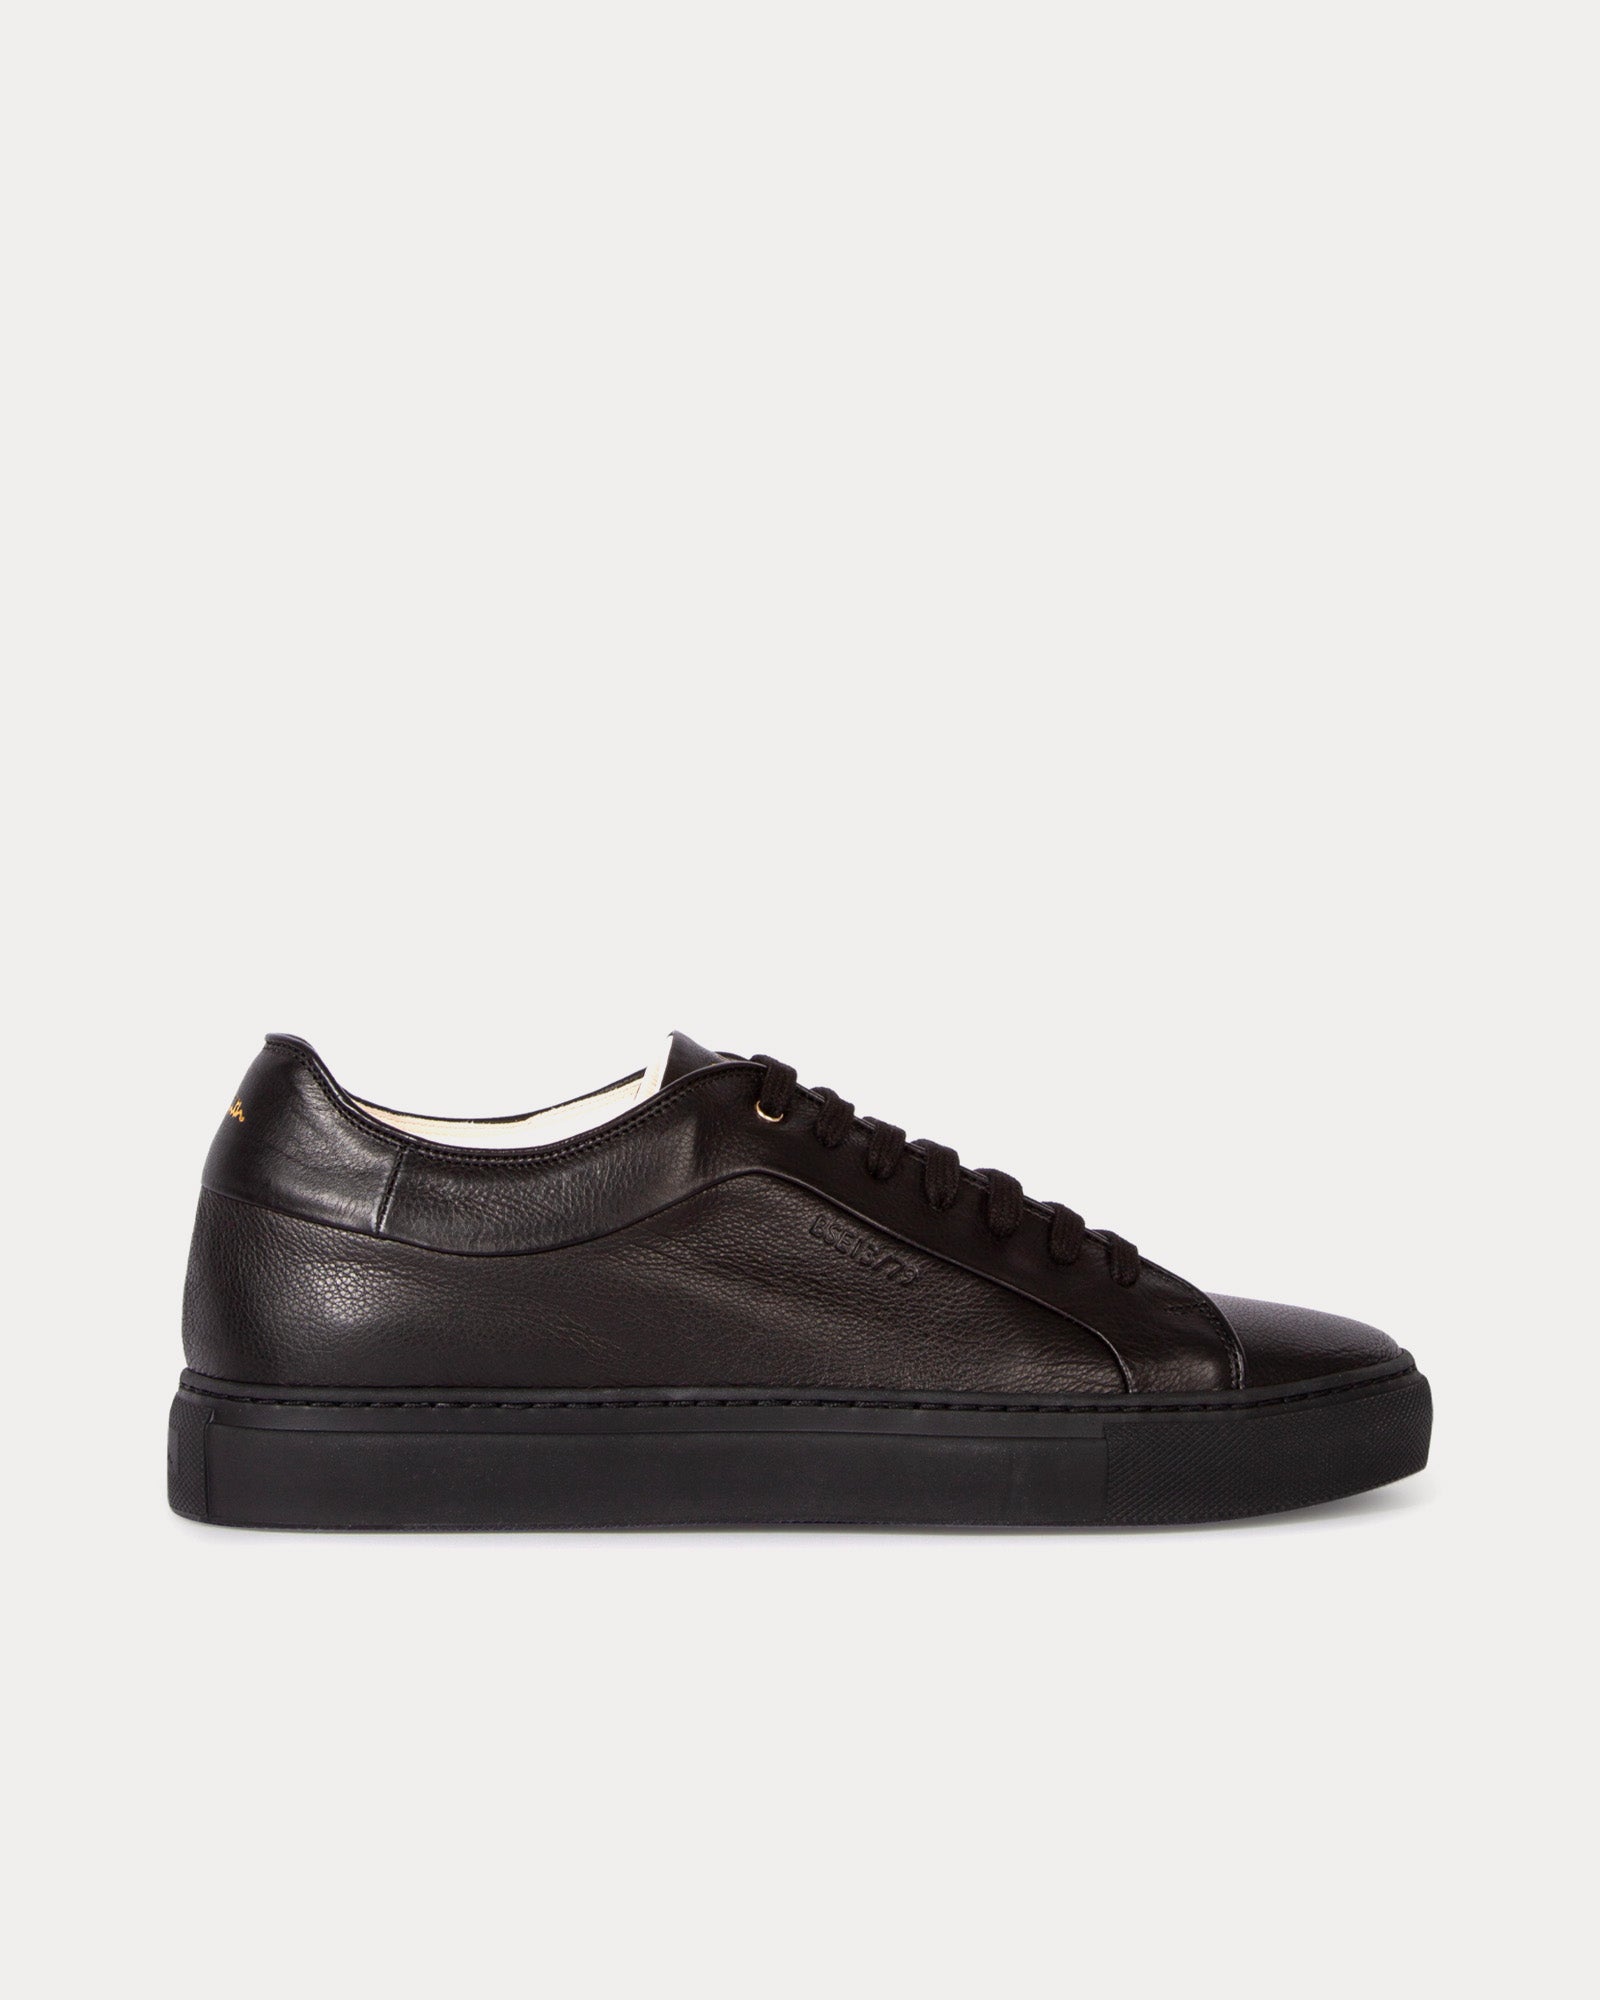 Paul Smith - Basso Eco Leather Black Low Top Sneakers